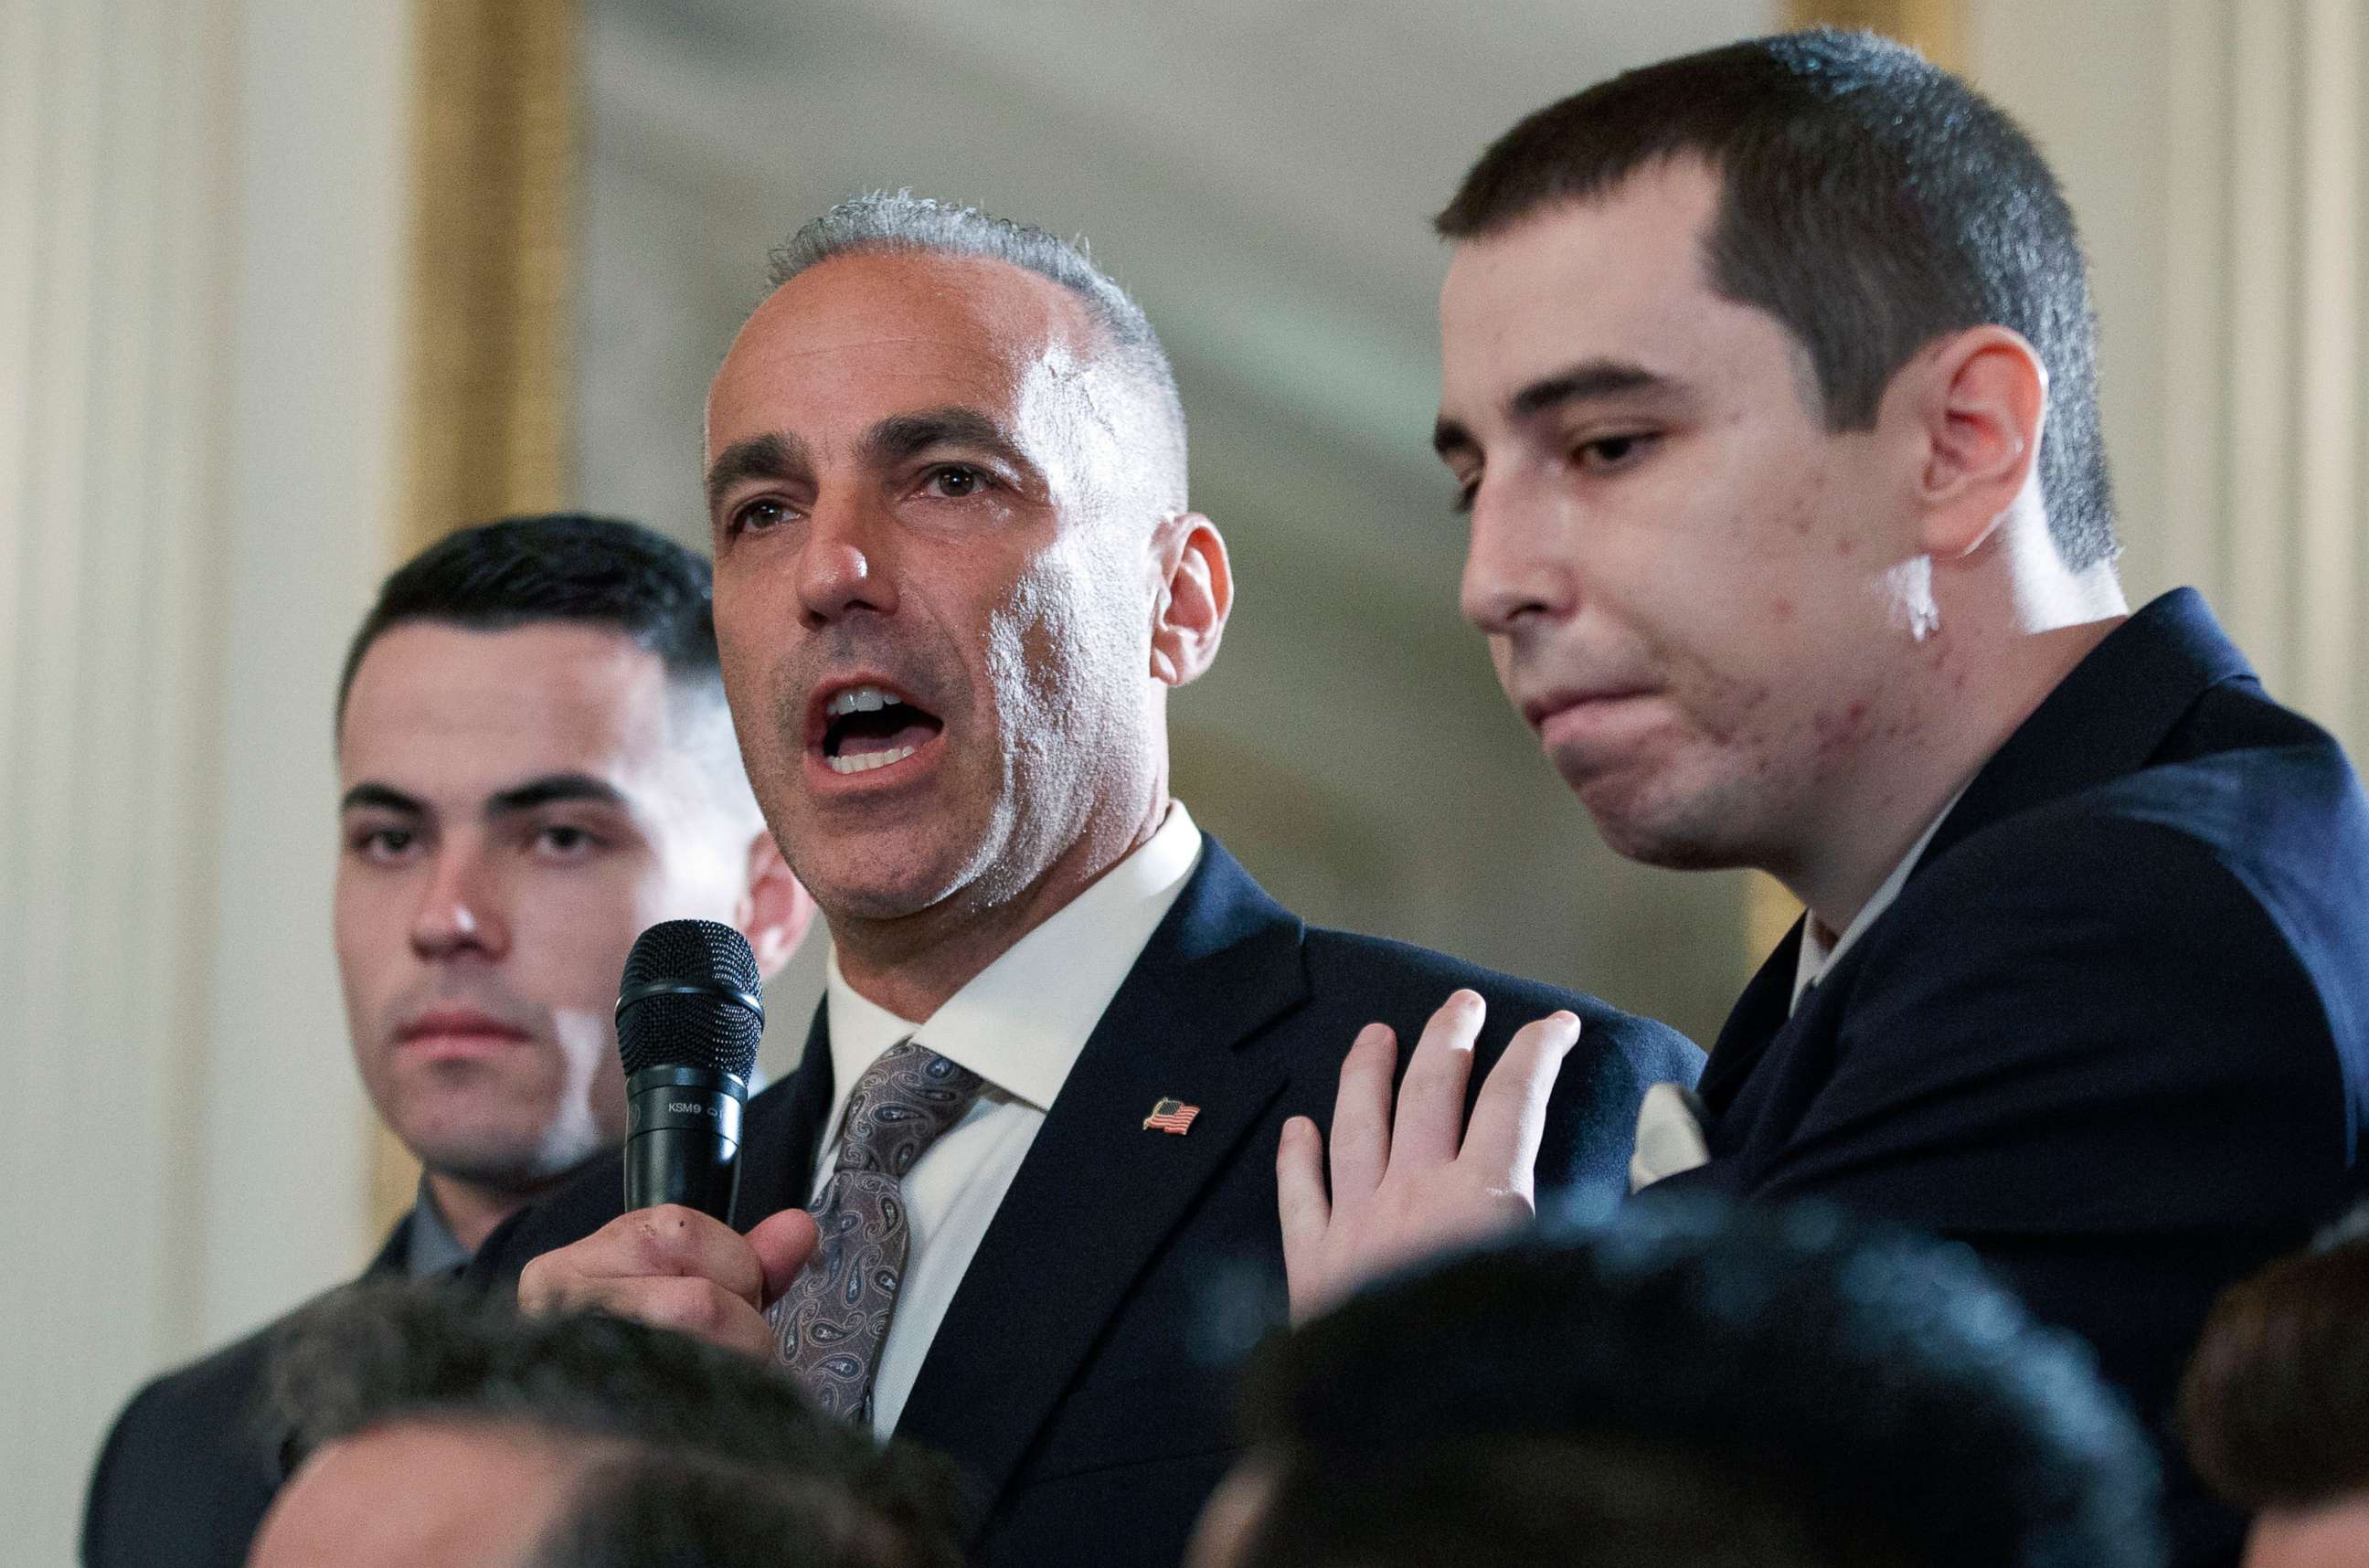 PHOTO: Andrew Pollack, father of slain Marjory Stoneman Douglas High School student Meadow Jade Pollack, joined by his sons, speaks during a listening session with President Donald Trump, students, teachers and others at the White House, Feb. 21, 2018. 